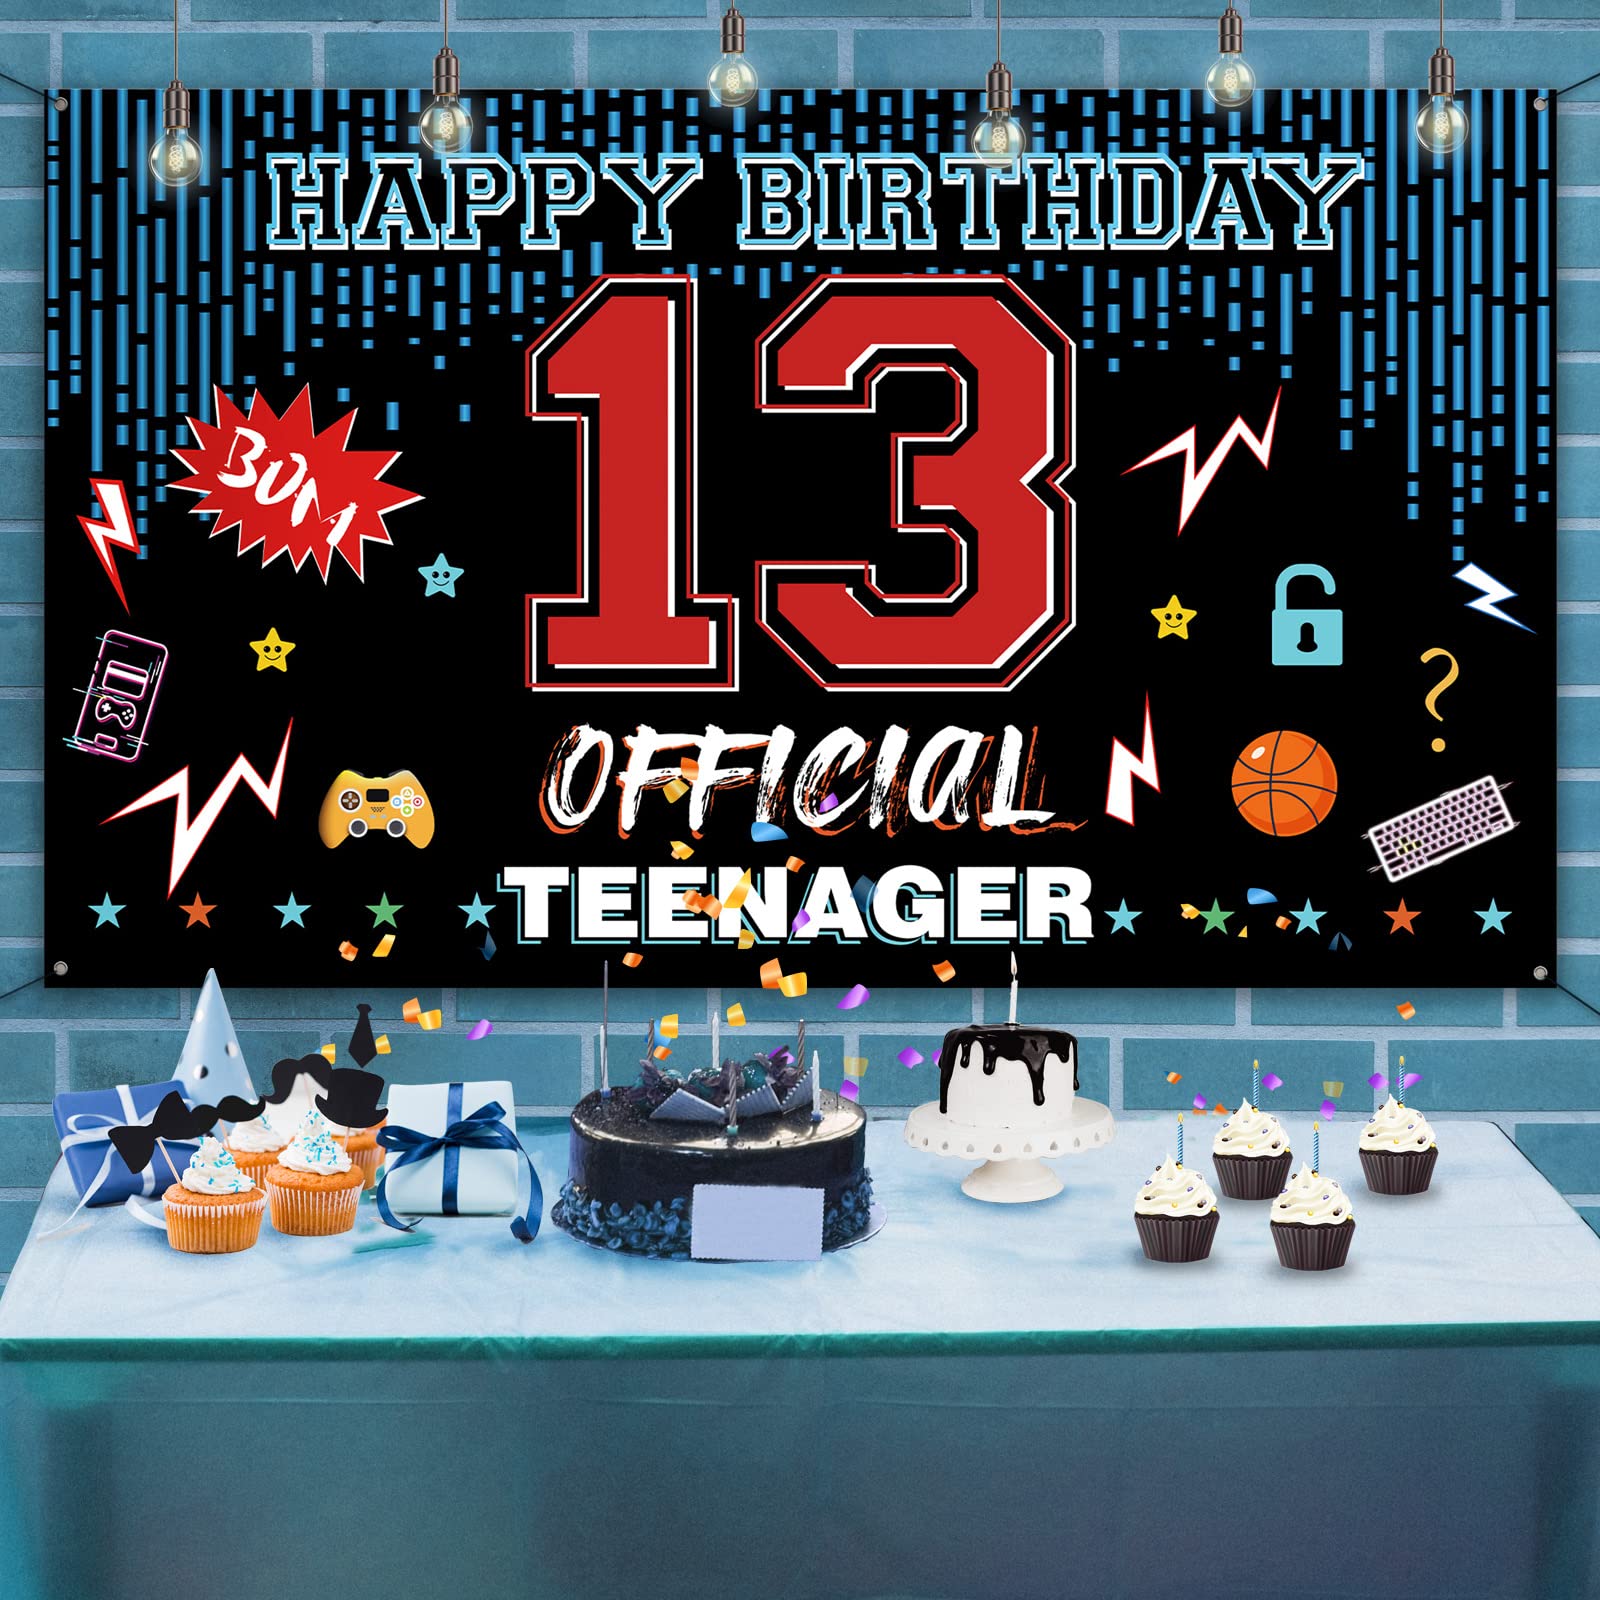 Official Teenager 13th Birthday Door Backdrop Banner, Happy 13th Birthday Decorations for Boys Girls, Red Blue 13 Year Old Birthday Party Yard Sign Photo Booth Props Supplies, Fabric, PHXEY